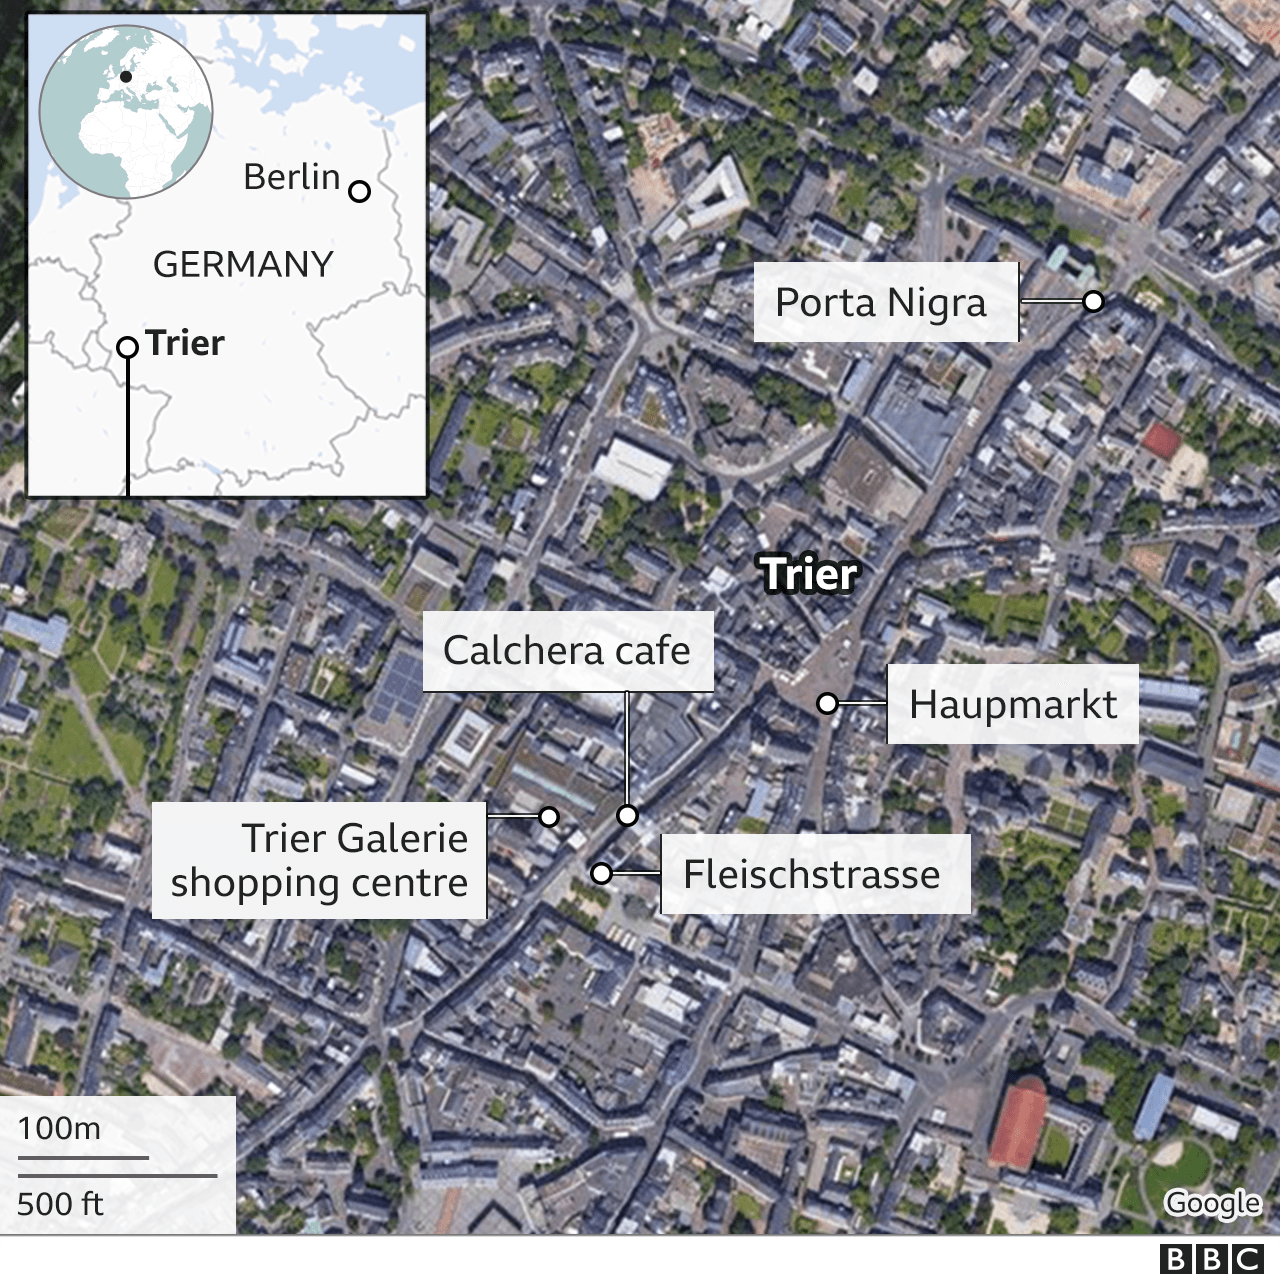 Location of the incident in Trier